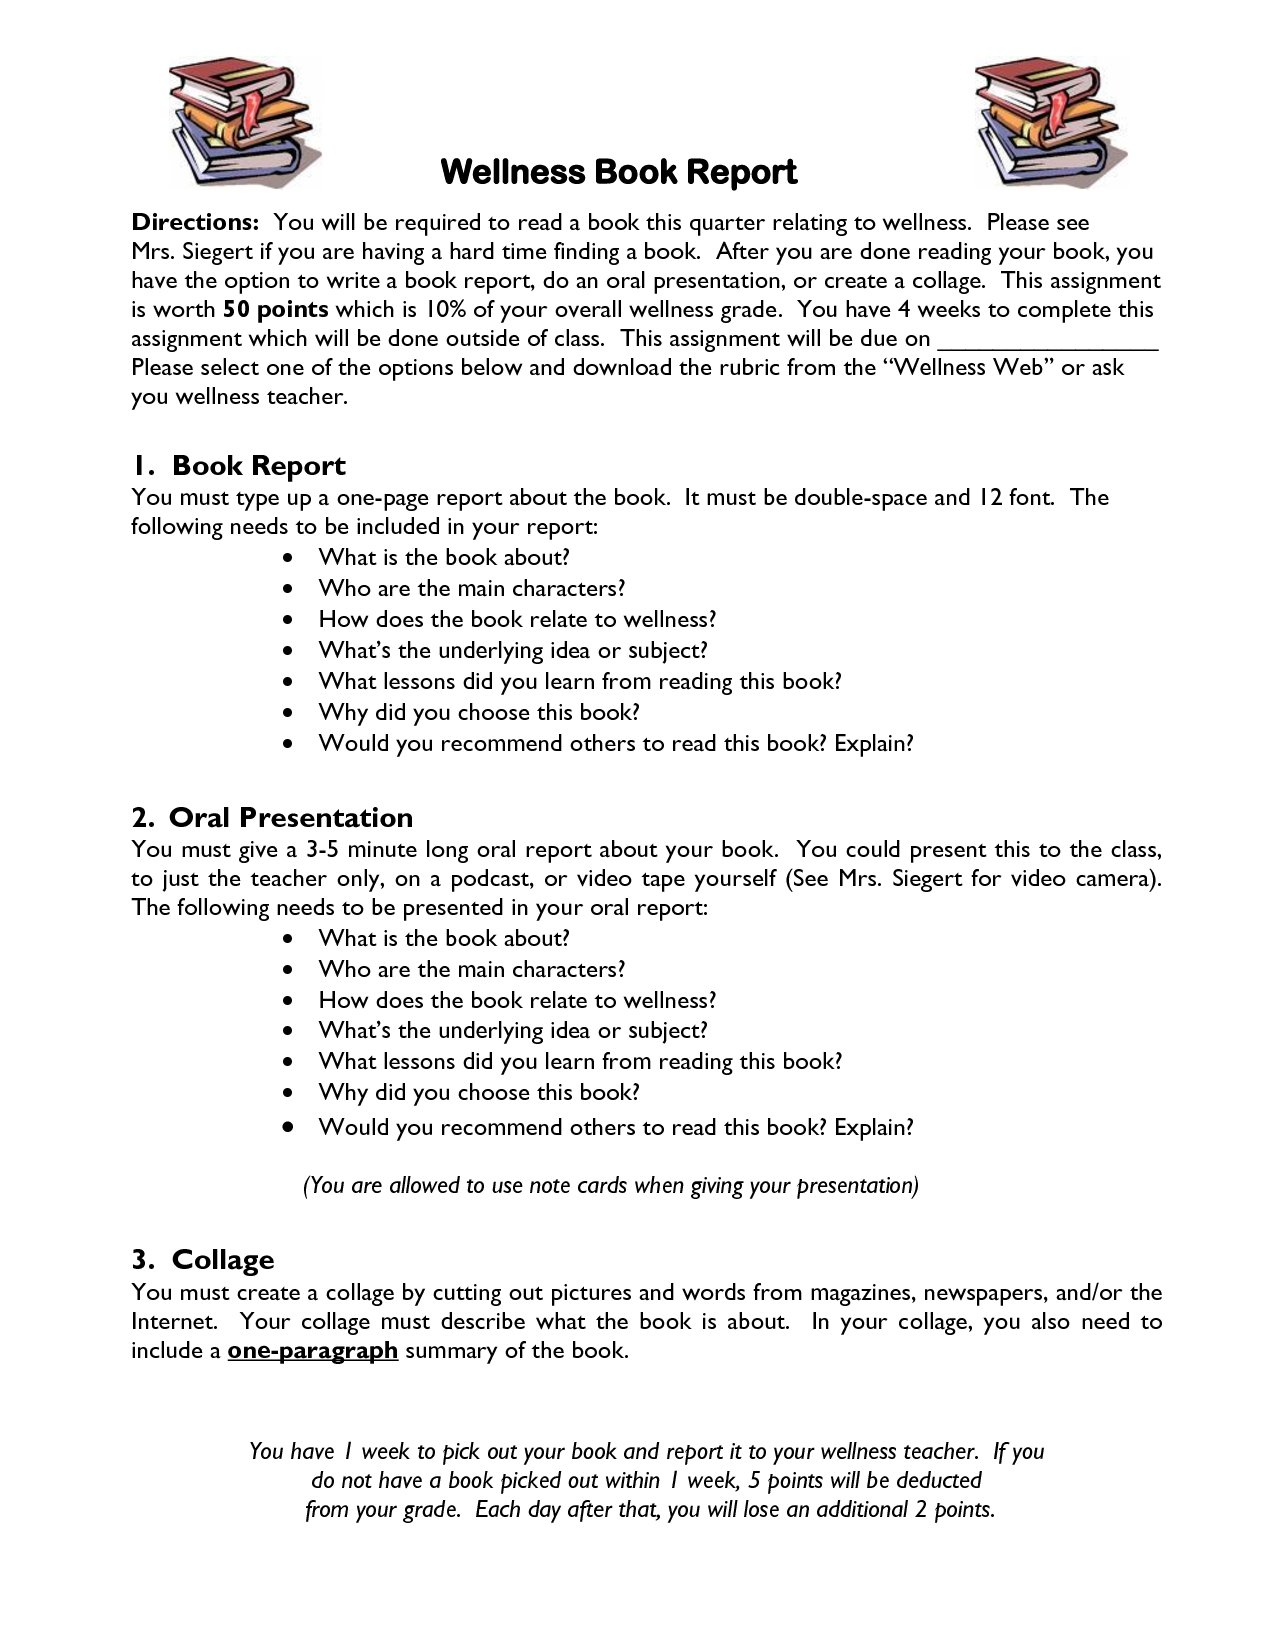 how to write a book report in 4th grade